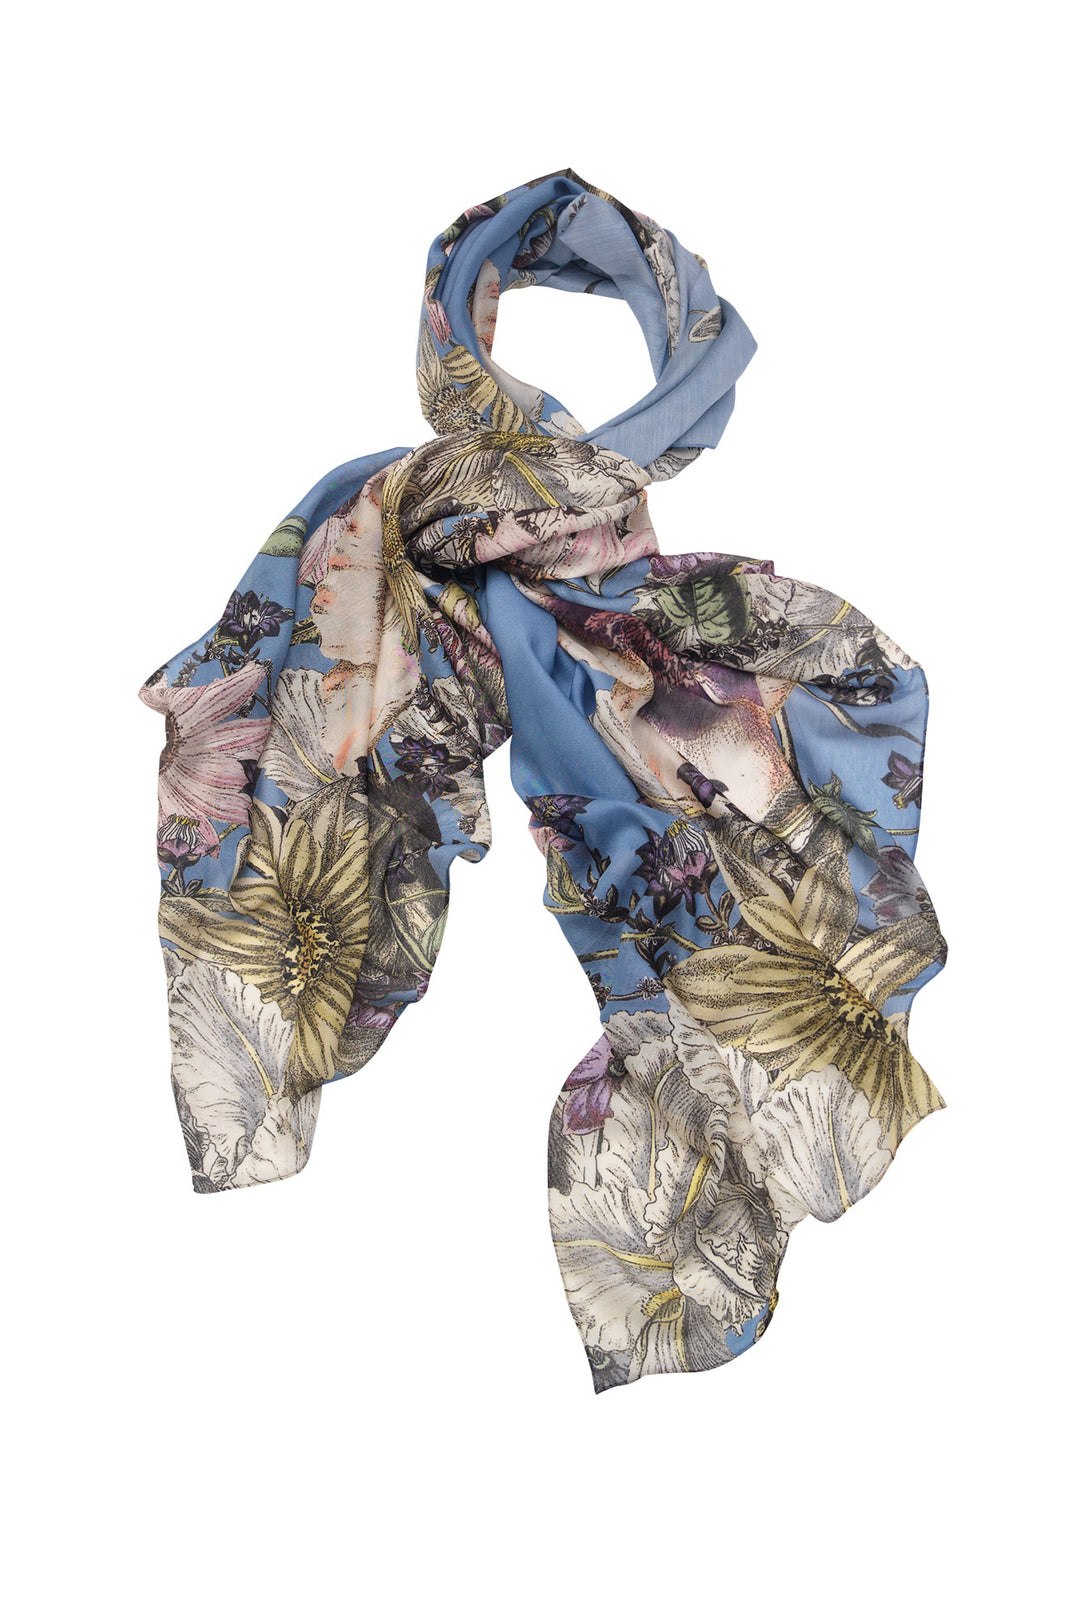 Women's Colour-infused floral Daisy scarf by One Hundred Stars